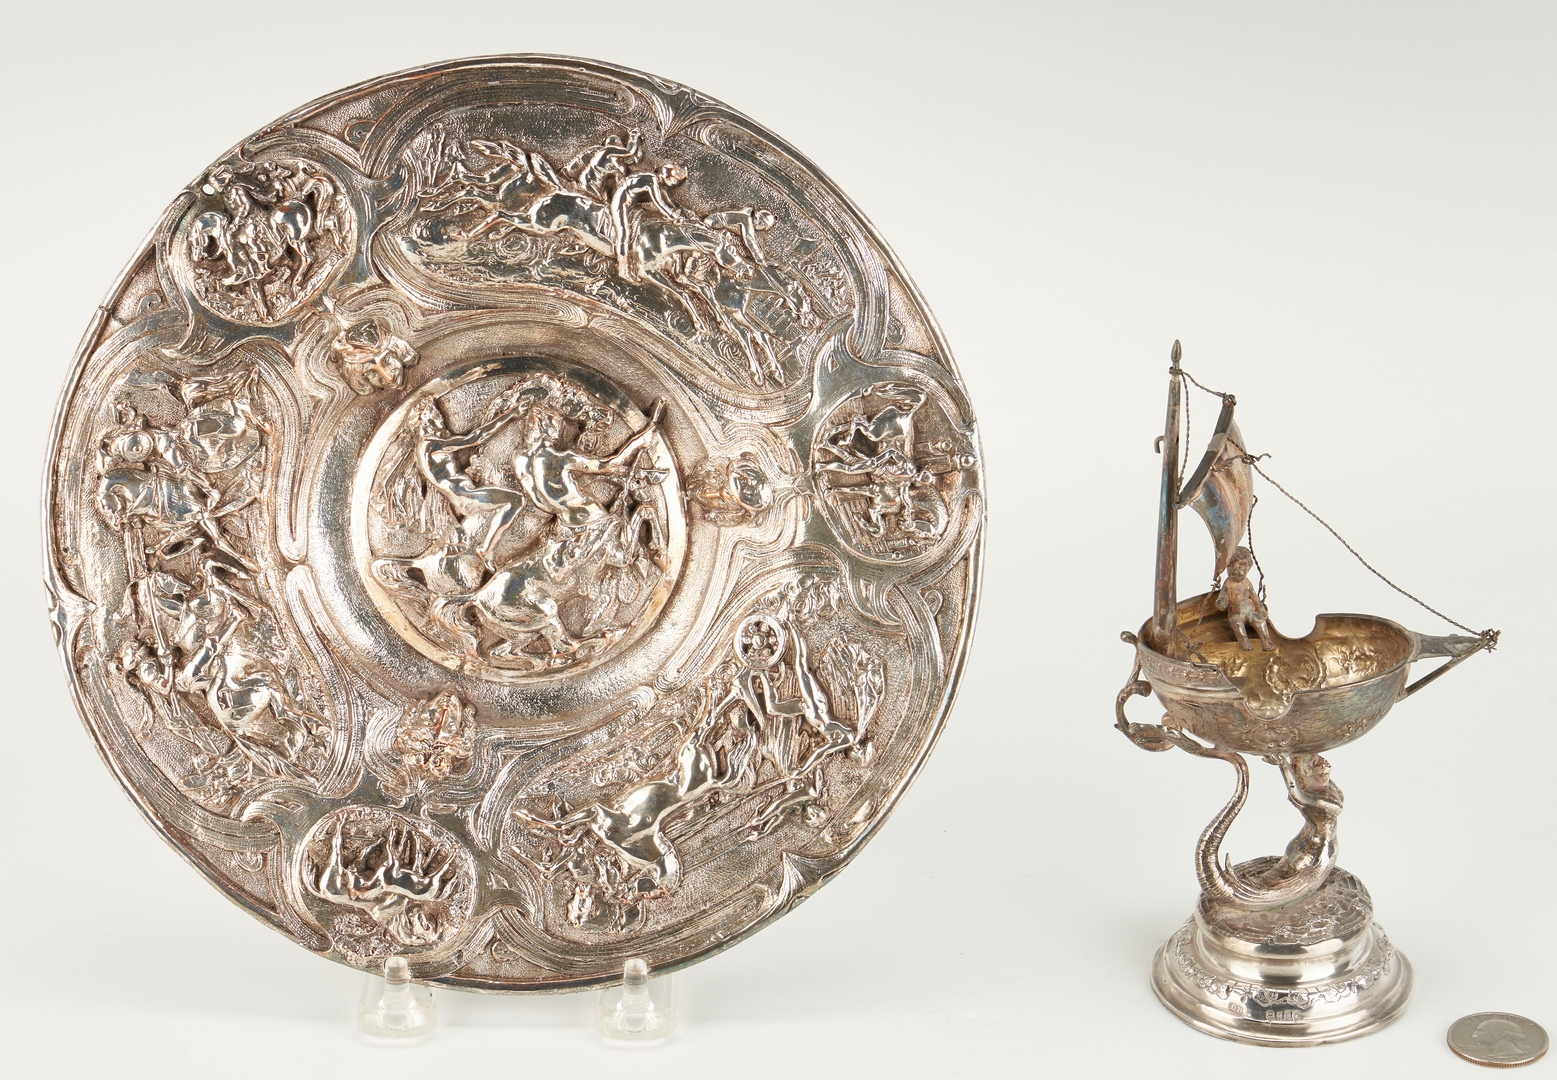 Lot 276: Continental Silver Salt Nef and Horse Motif plate